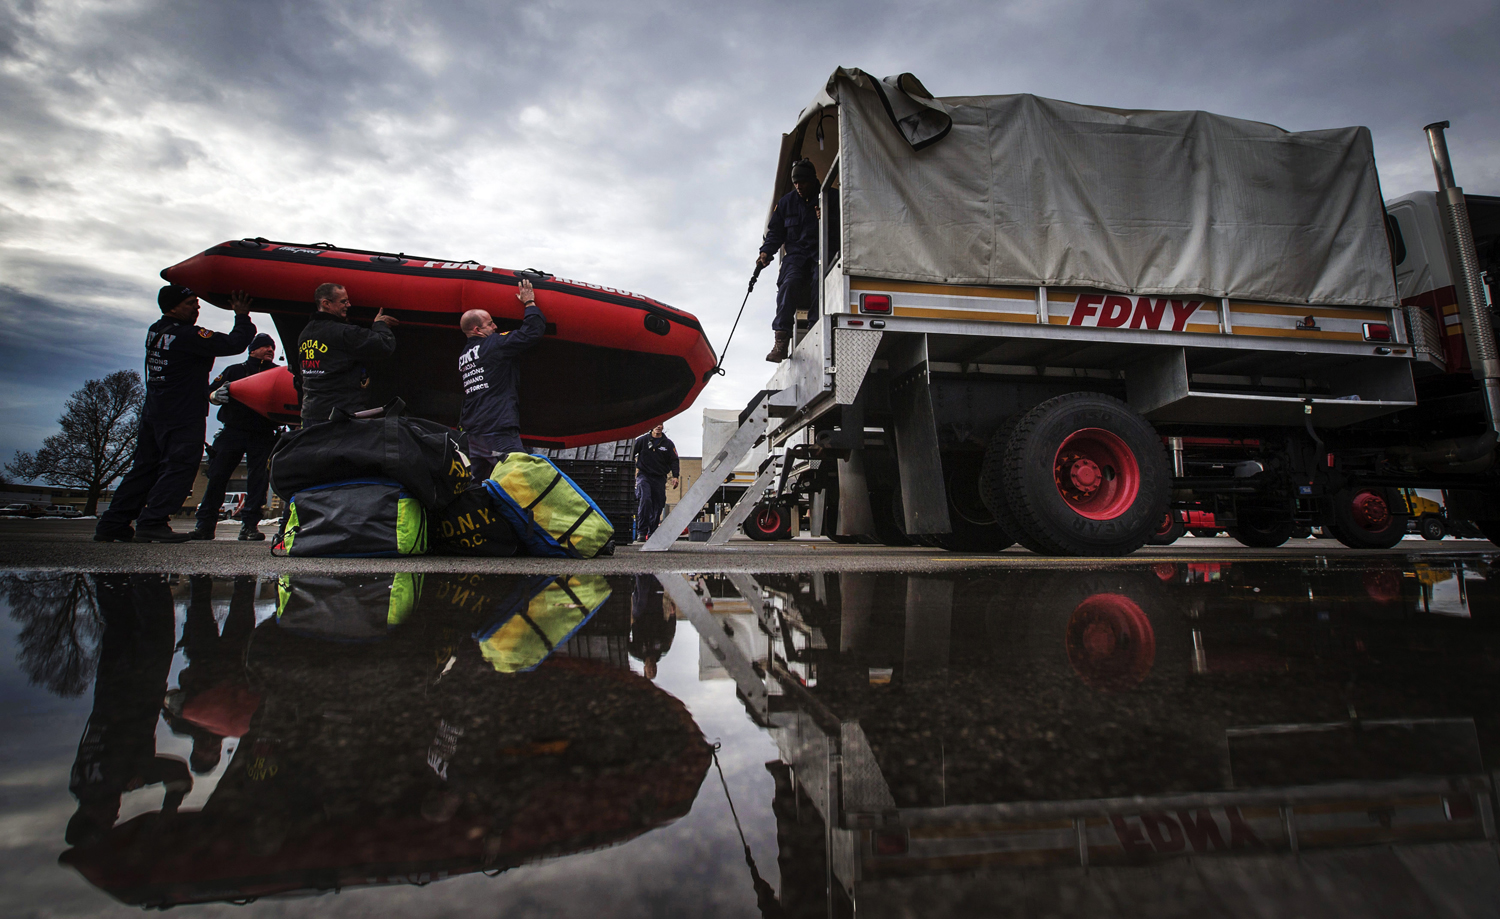 FDNY firefighters from New York City load a rescue boat to prepare for possible flooding following a massive snow storm in Williamsville